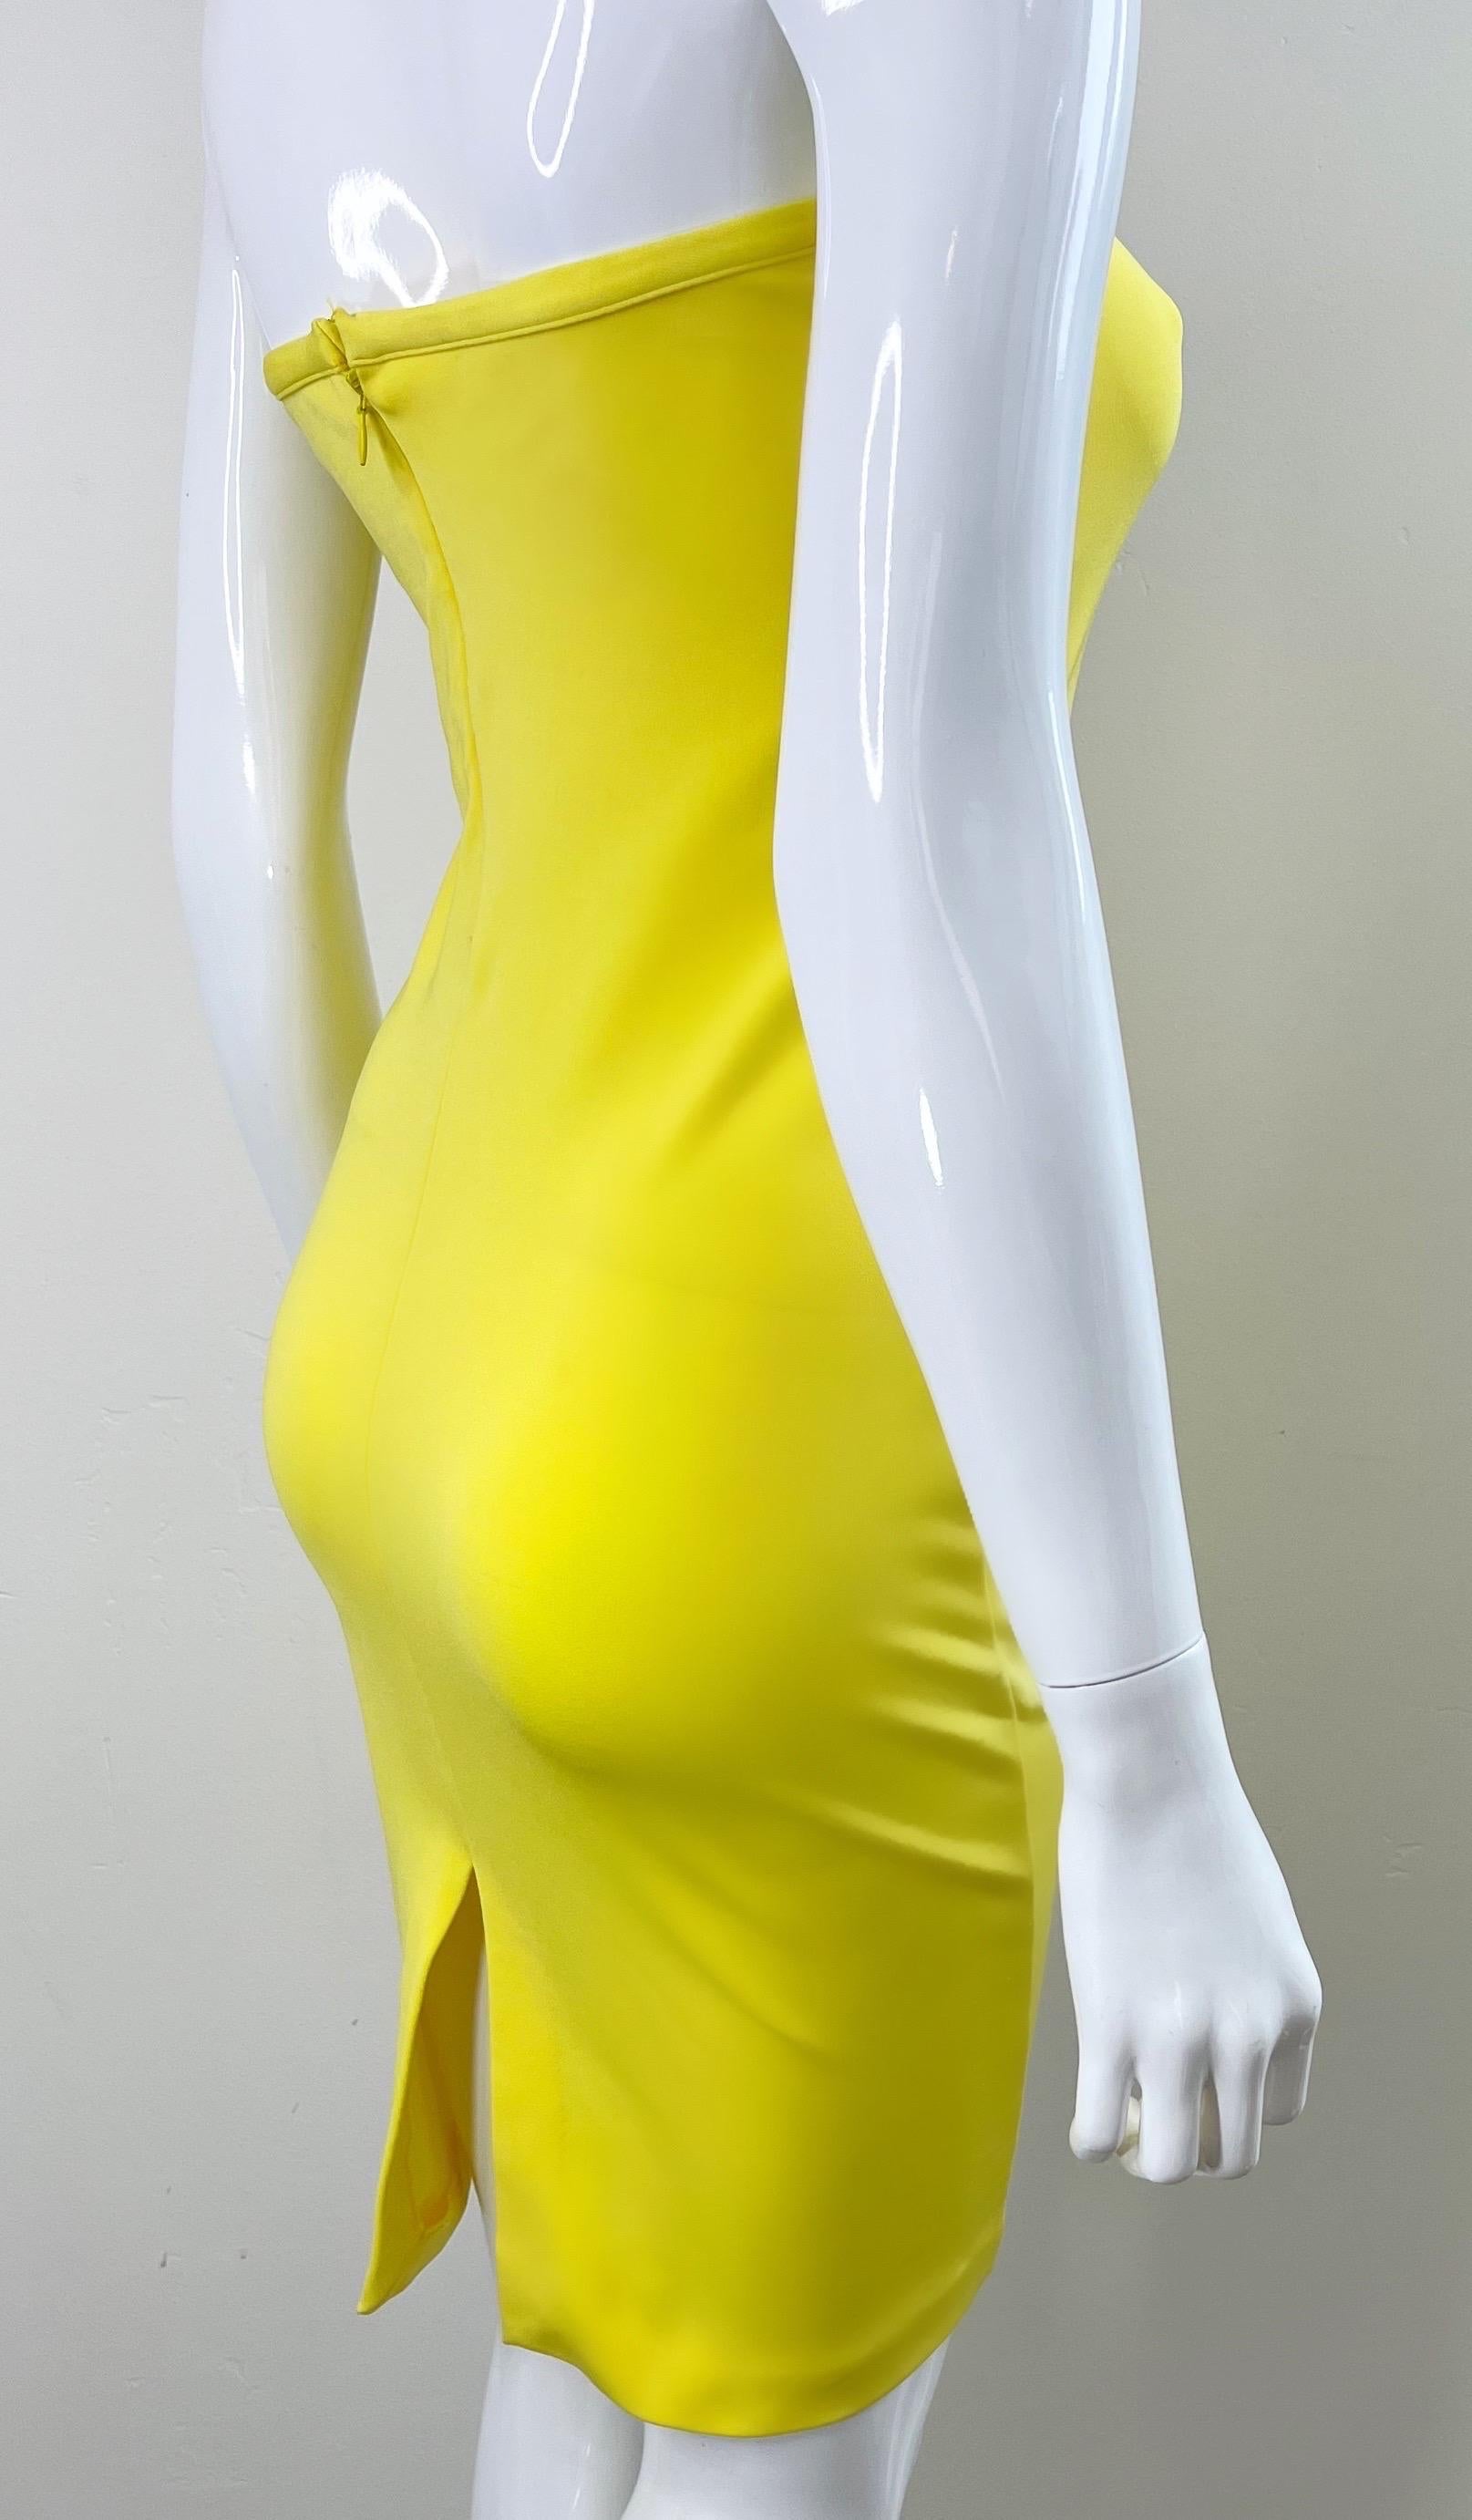 1990s Gianni Versace Versus Size 8 Canary Yellow Strapless Vintage 90s Dress For Sale 3